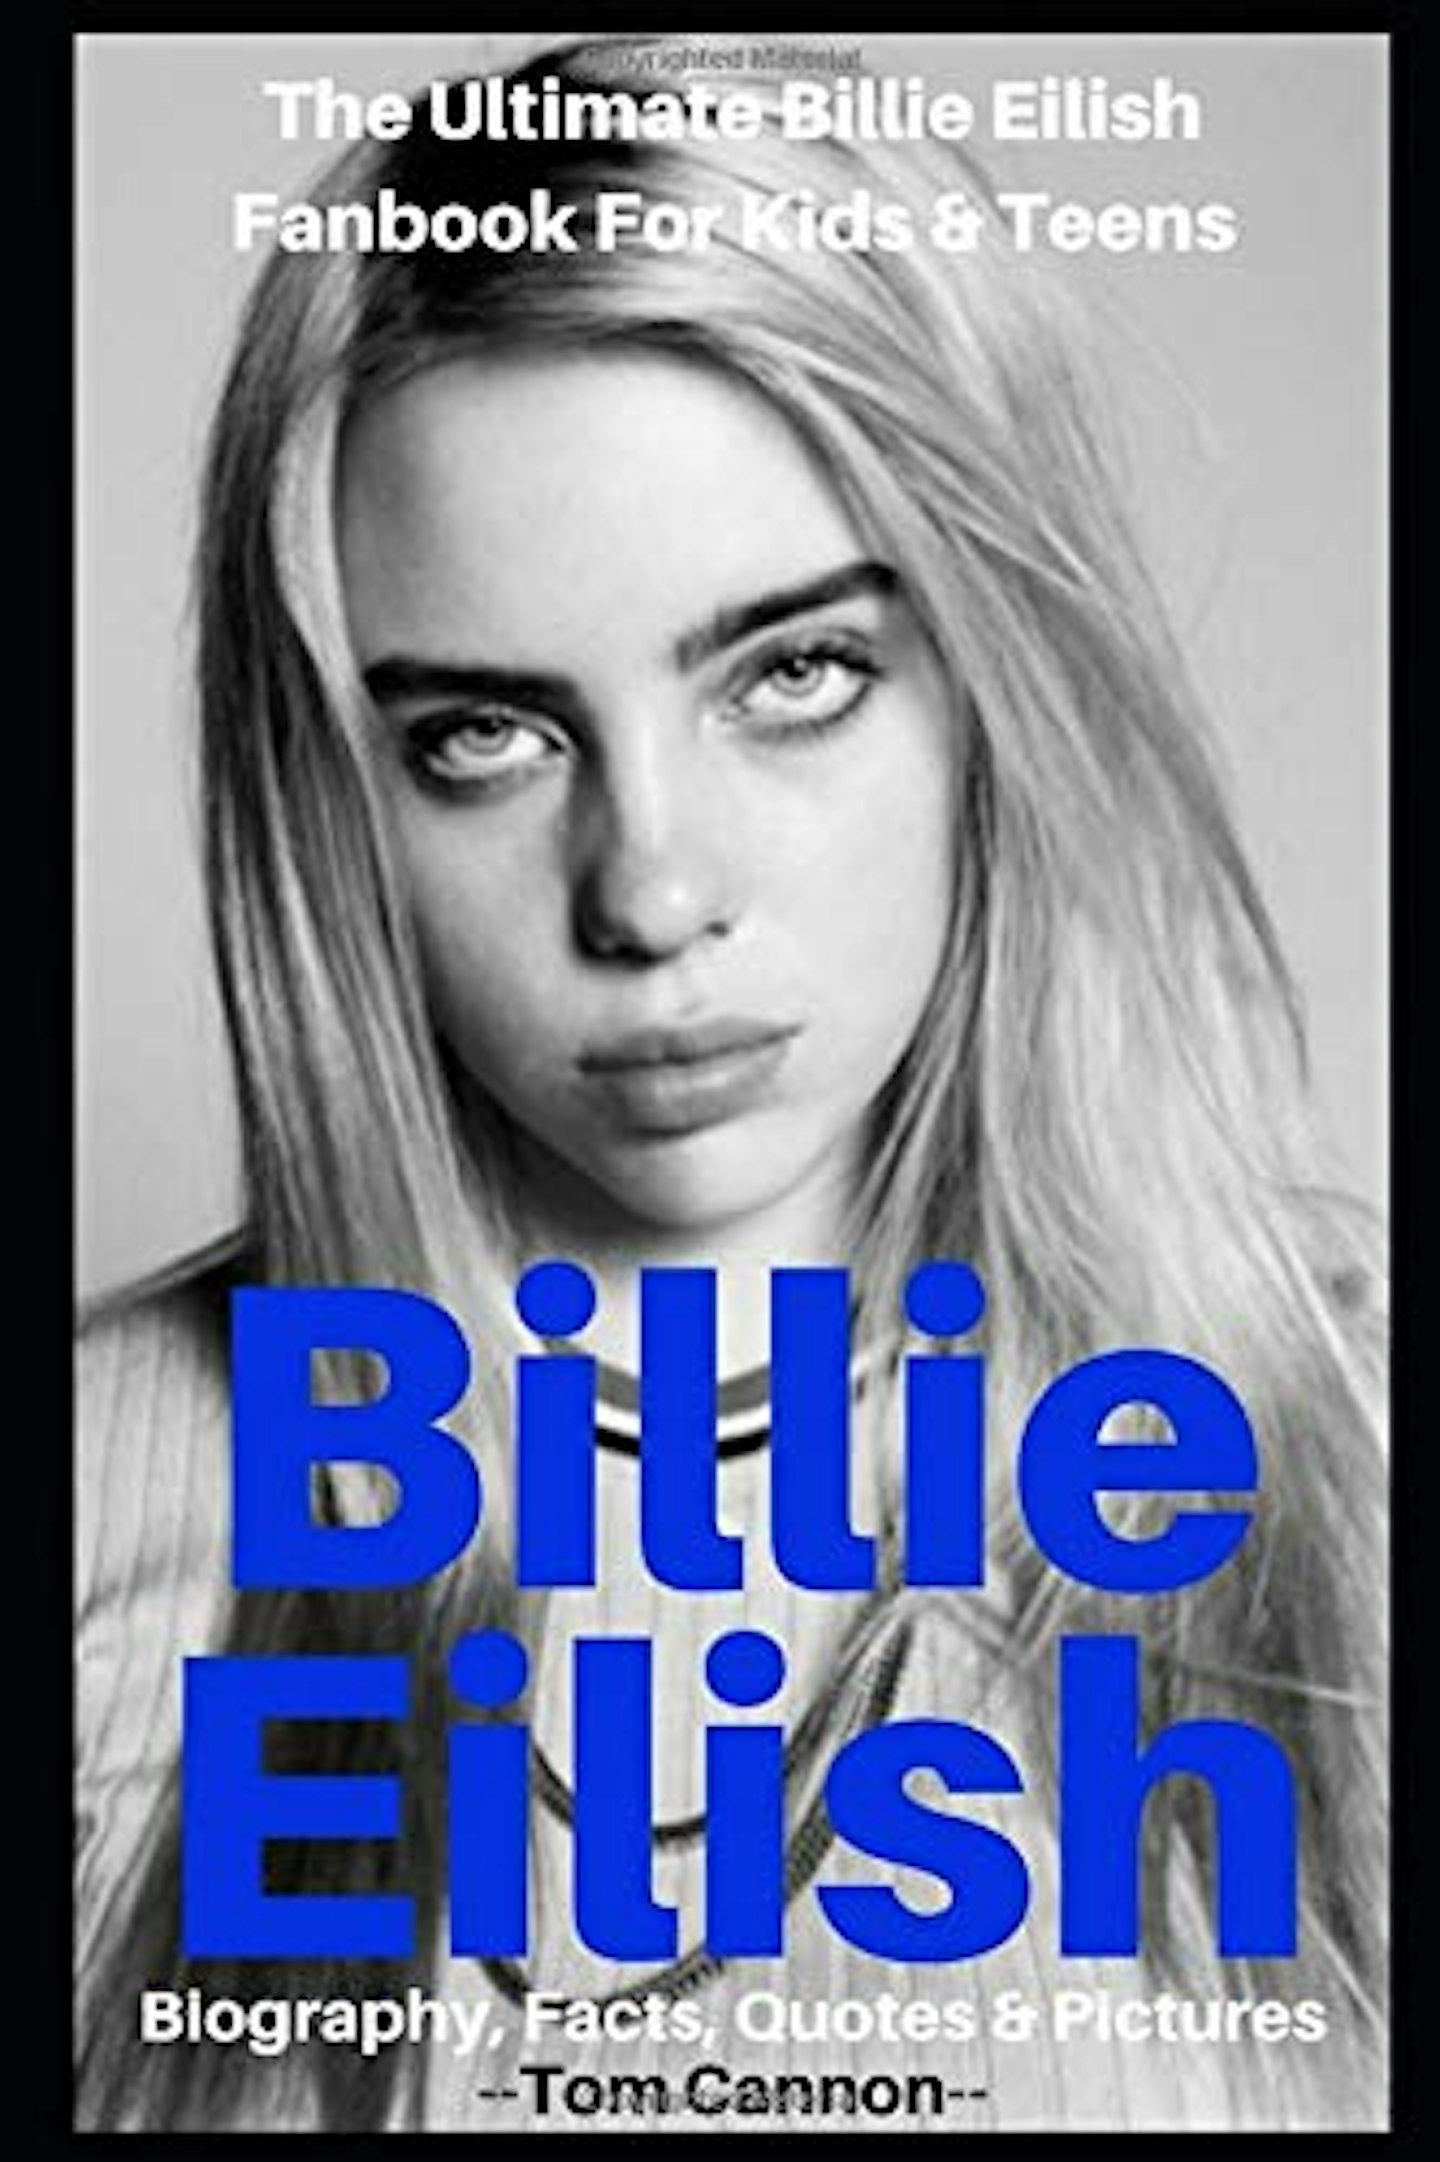 Billie Eilish: Biography, Facts, Quotes and Pictures by Tom Cannon, 5.50